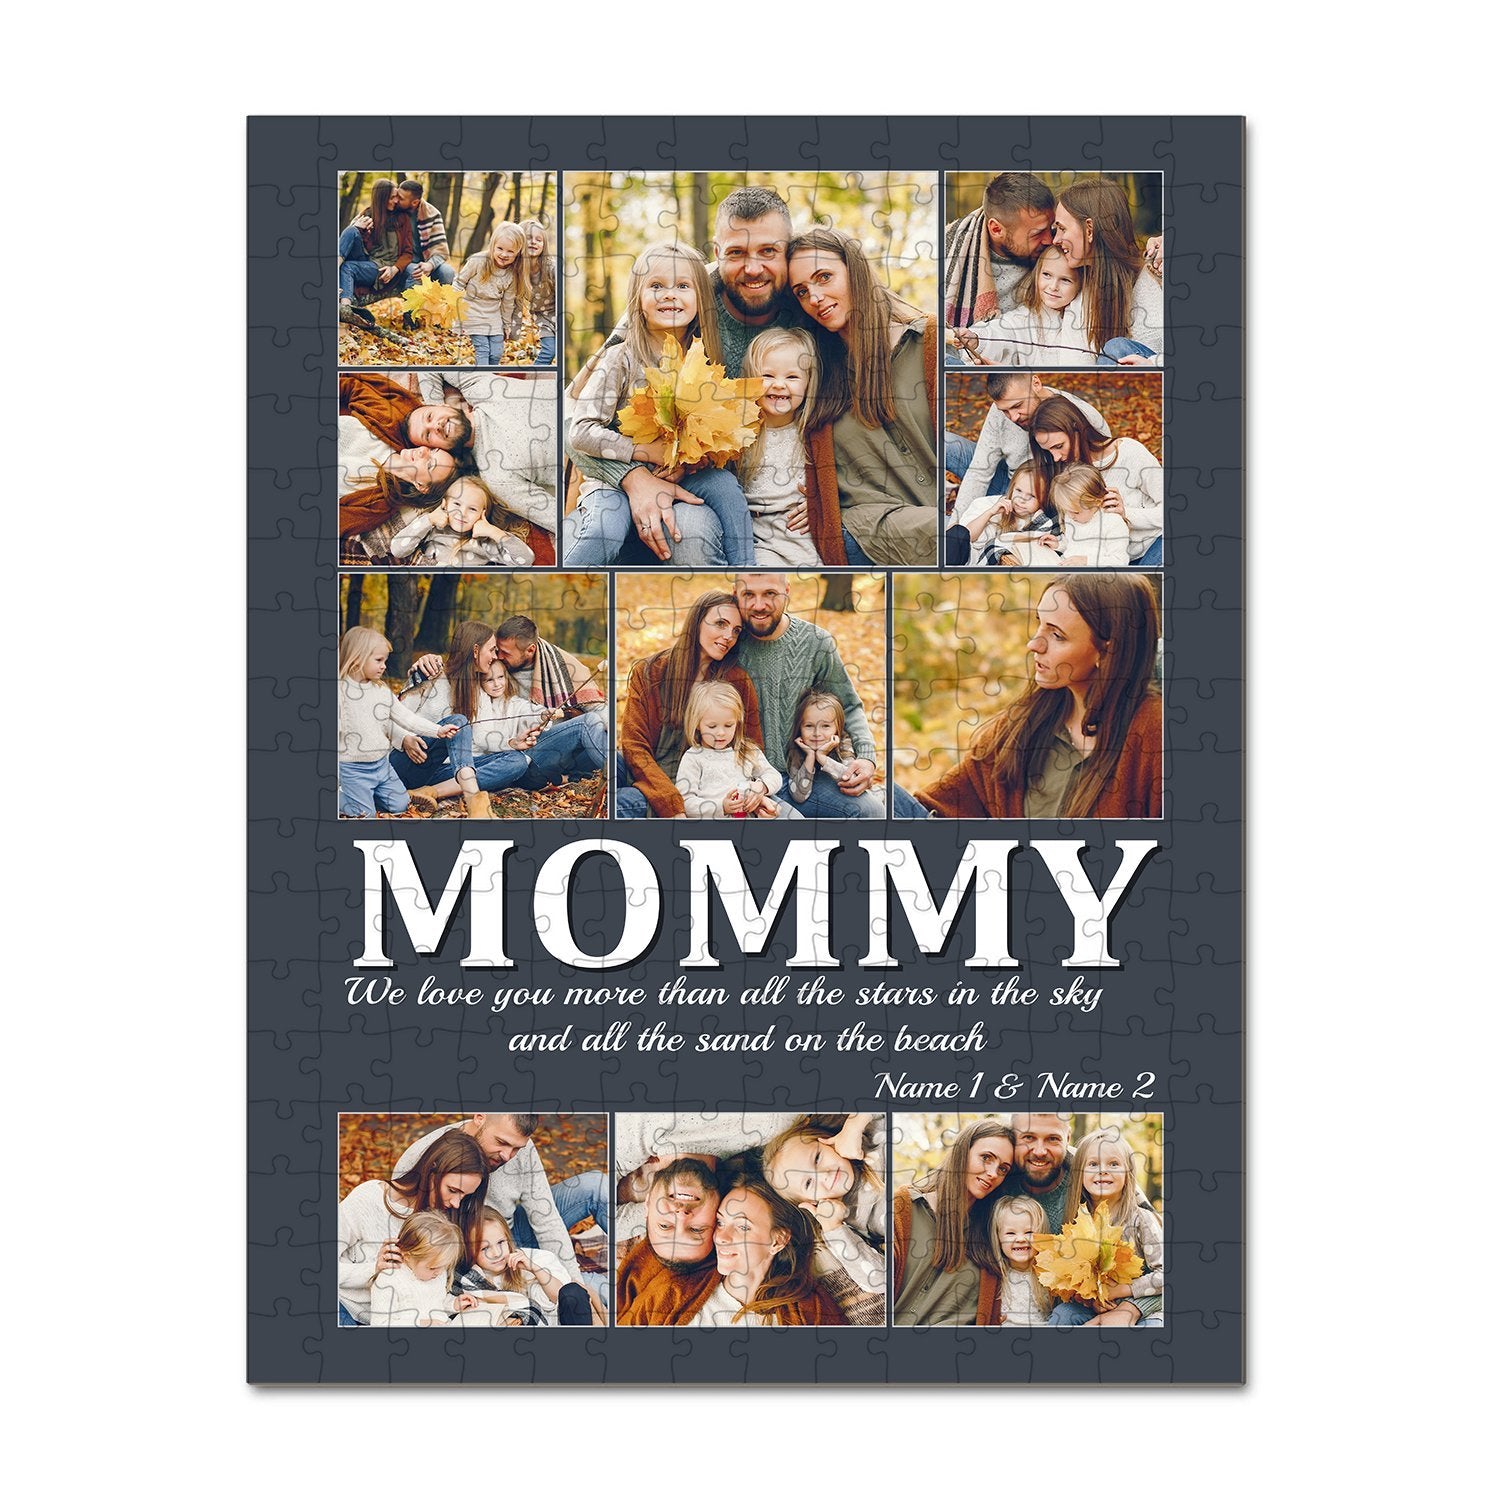 Mommy Custom Photo Collage, Personalized Name And Text Jigsaw Puzzles